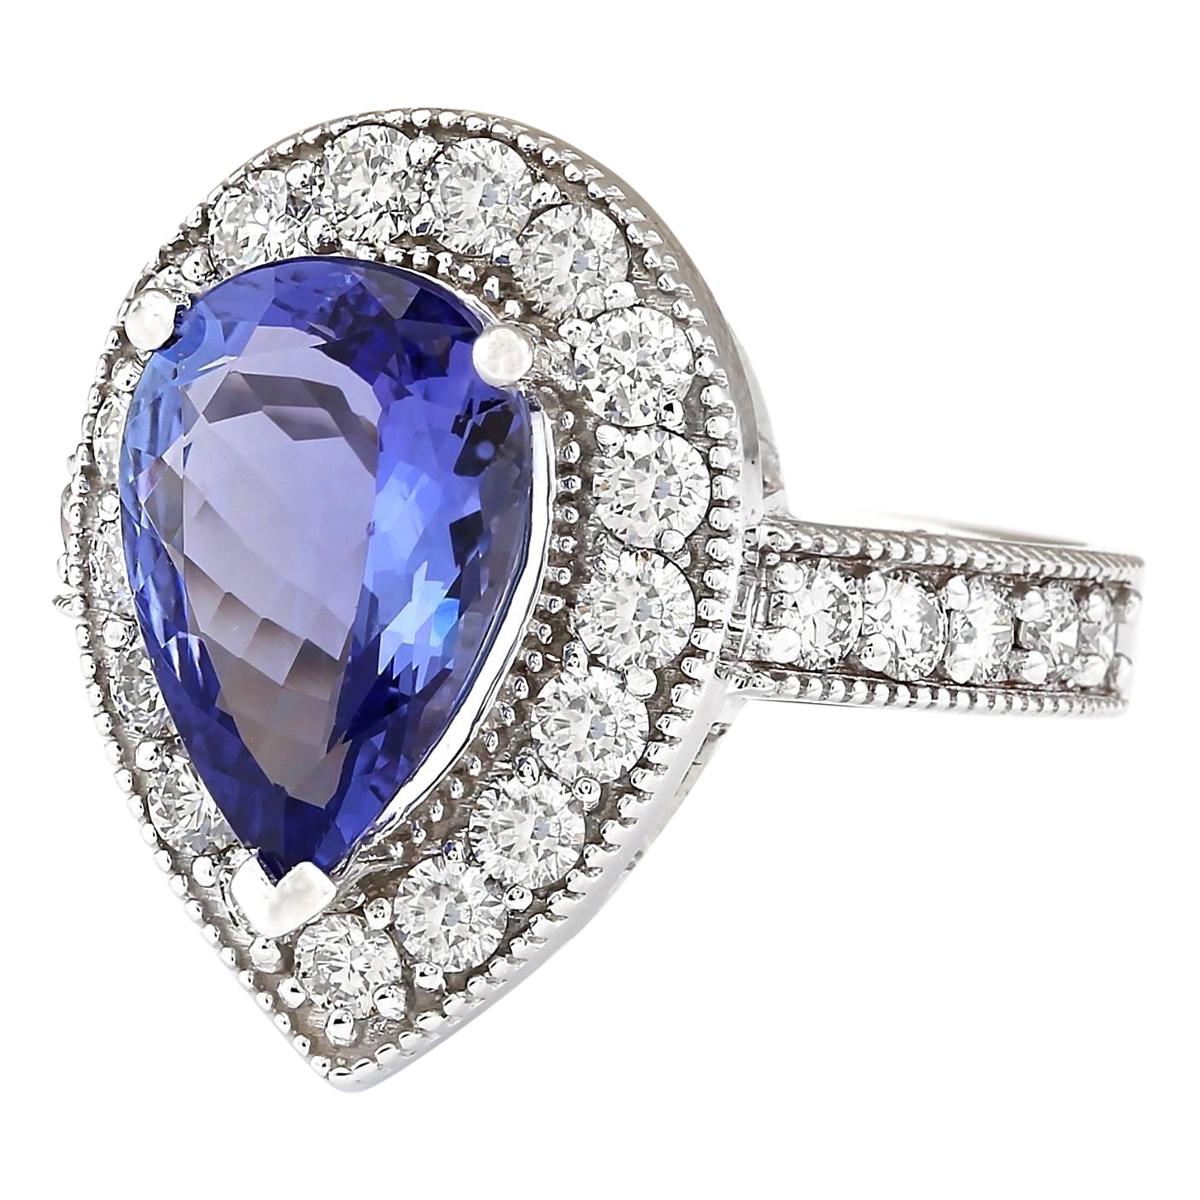 Stamped: 14K White Gold
Total Ring Weight: 7.1 Grams
Total Natural Tanzanite Weight is 3.02 Carat (Measures: 13.00x9.00 mm)
Color: Blue
Total Natural Diamond Weight is 1.10 Carat
Color: F-G, Clarity: VS2-SI1
Face Measures: 19.25x14.30 mm
Sku: